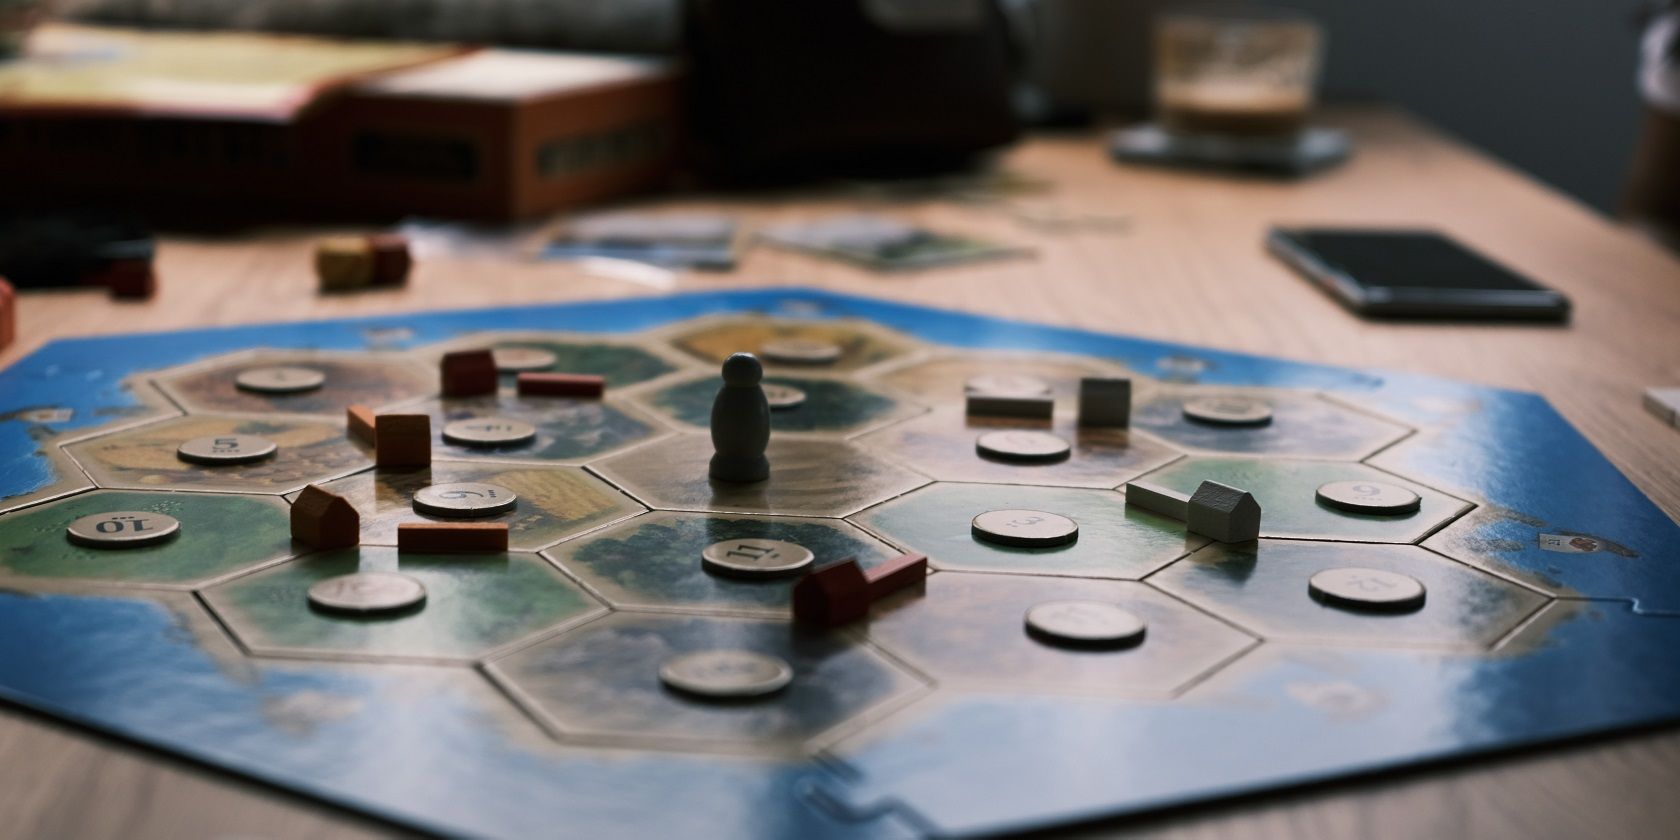 Catan Board Game and Cell Phone